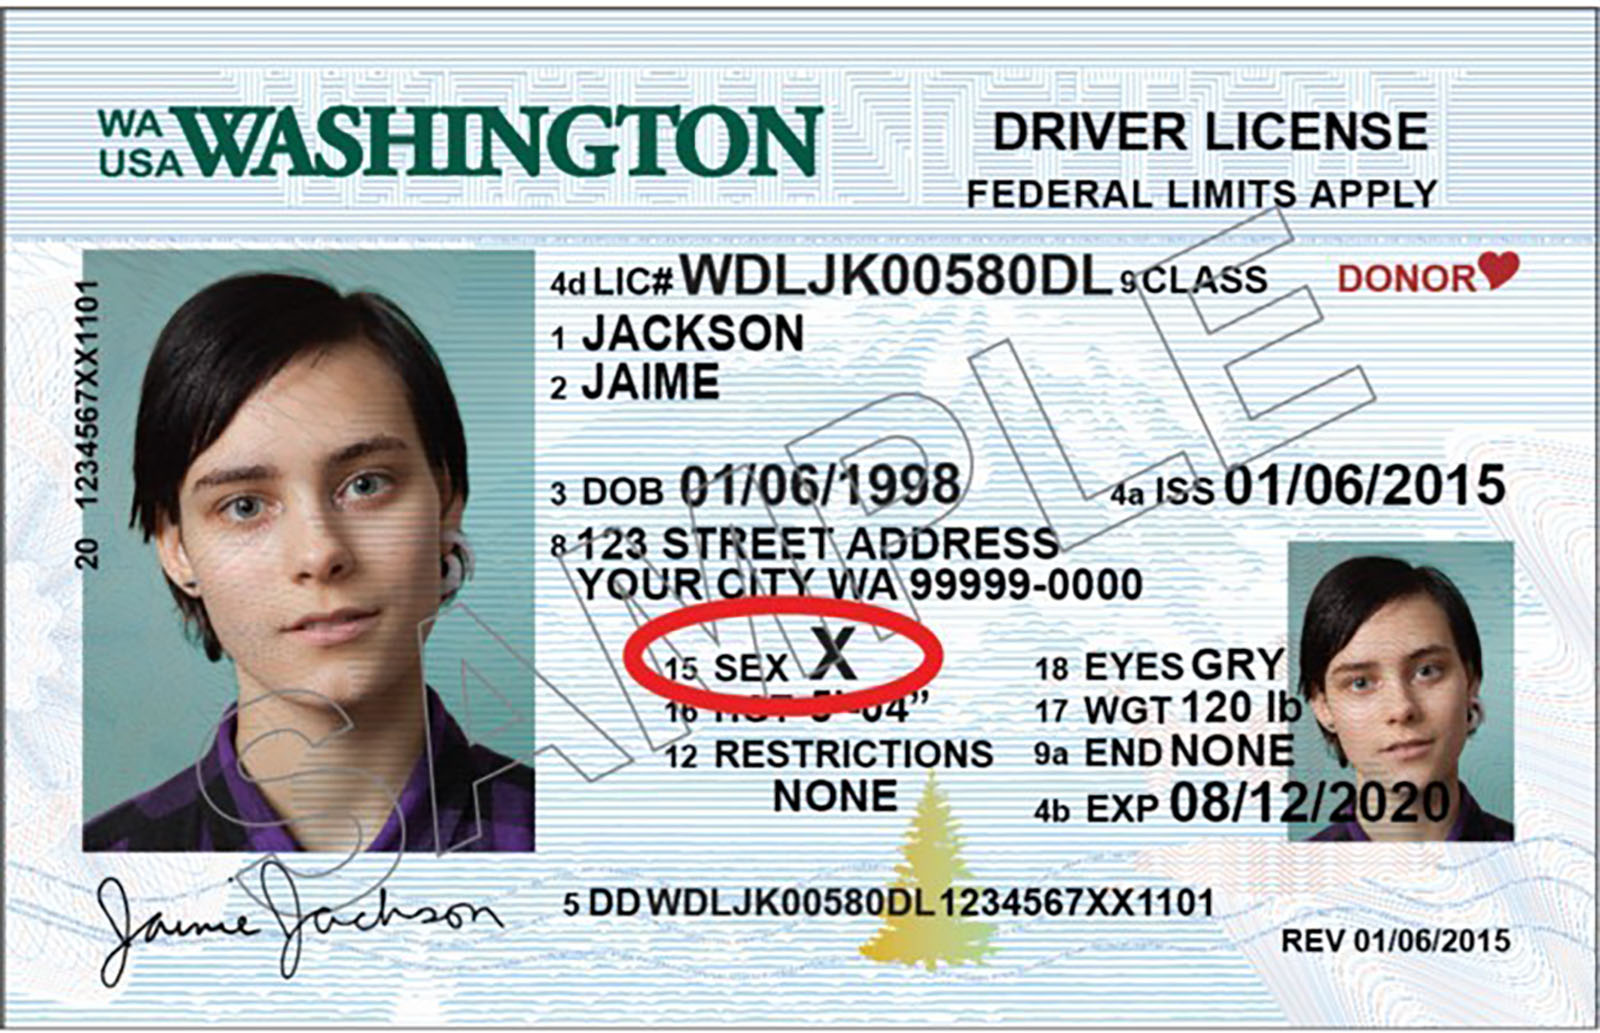 2 more states will offer a 3rd gender option on driver's licenses | CNN